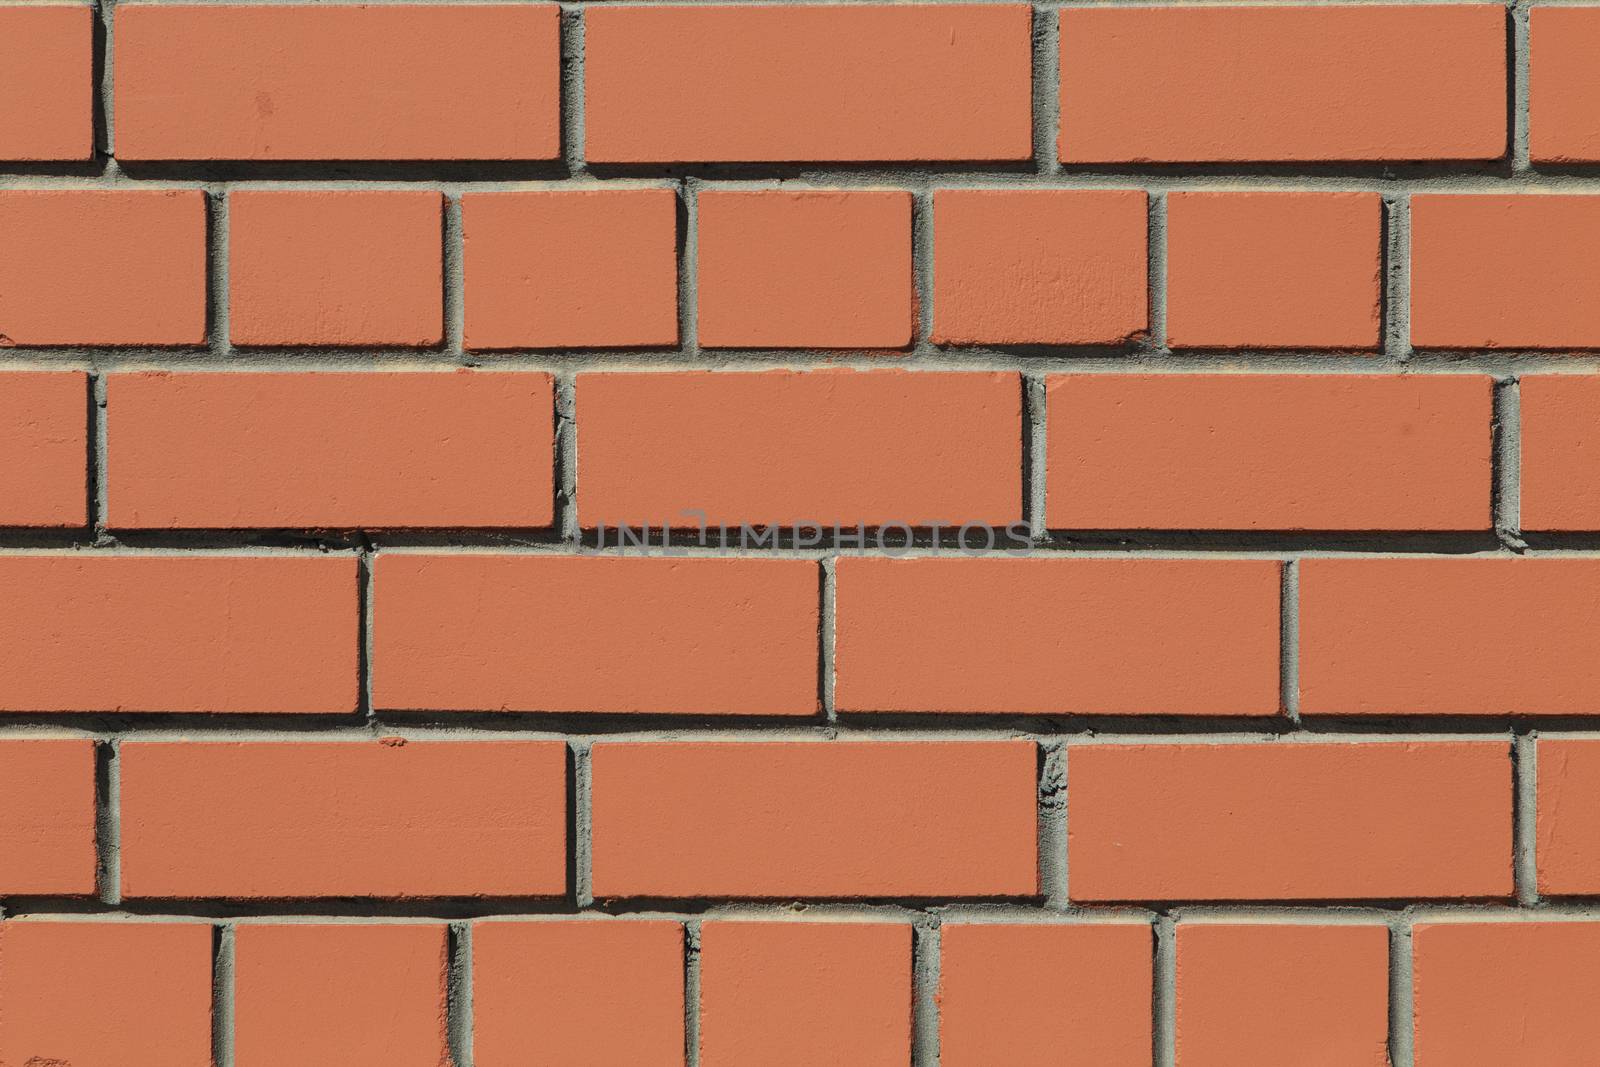 Front close-up view of a flat brick wall with brown bricks symmetrically spread out